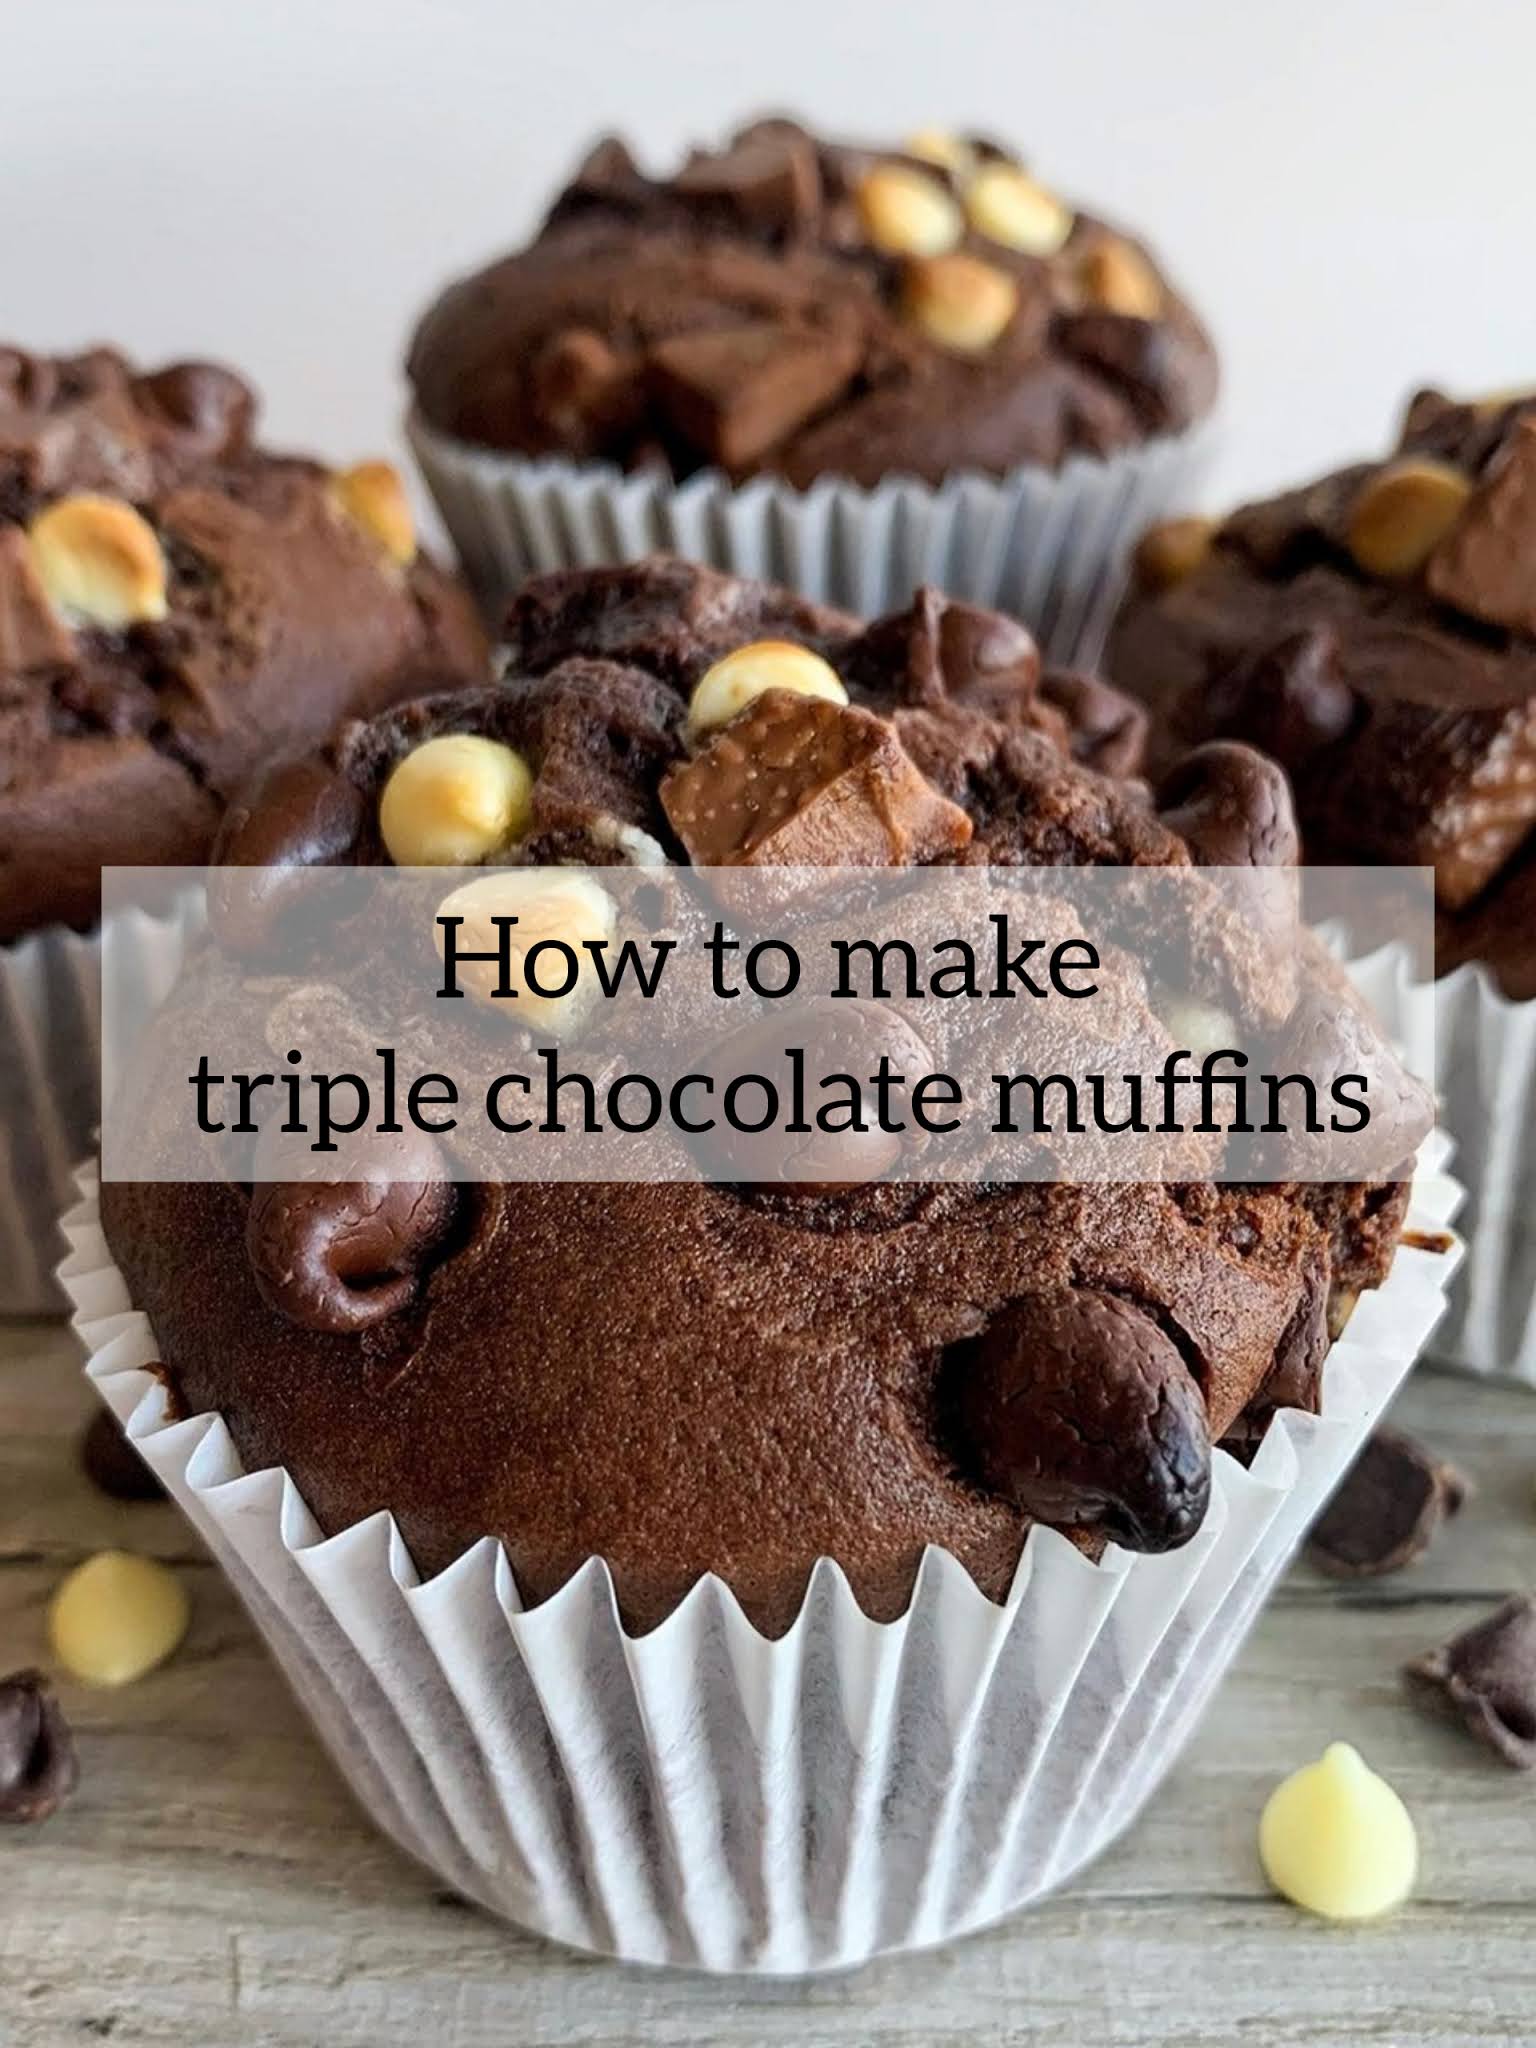 HOW TO MAKE TRIPLE CHOCOLATE MUFFINS.